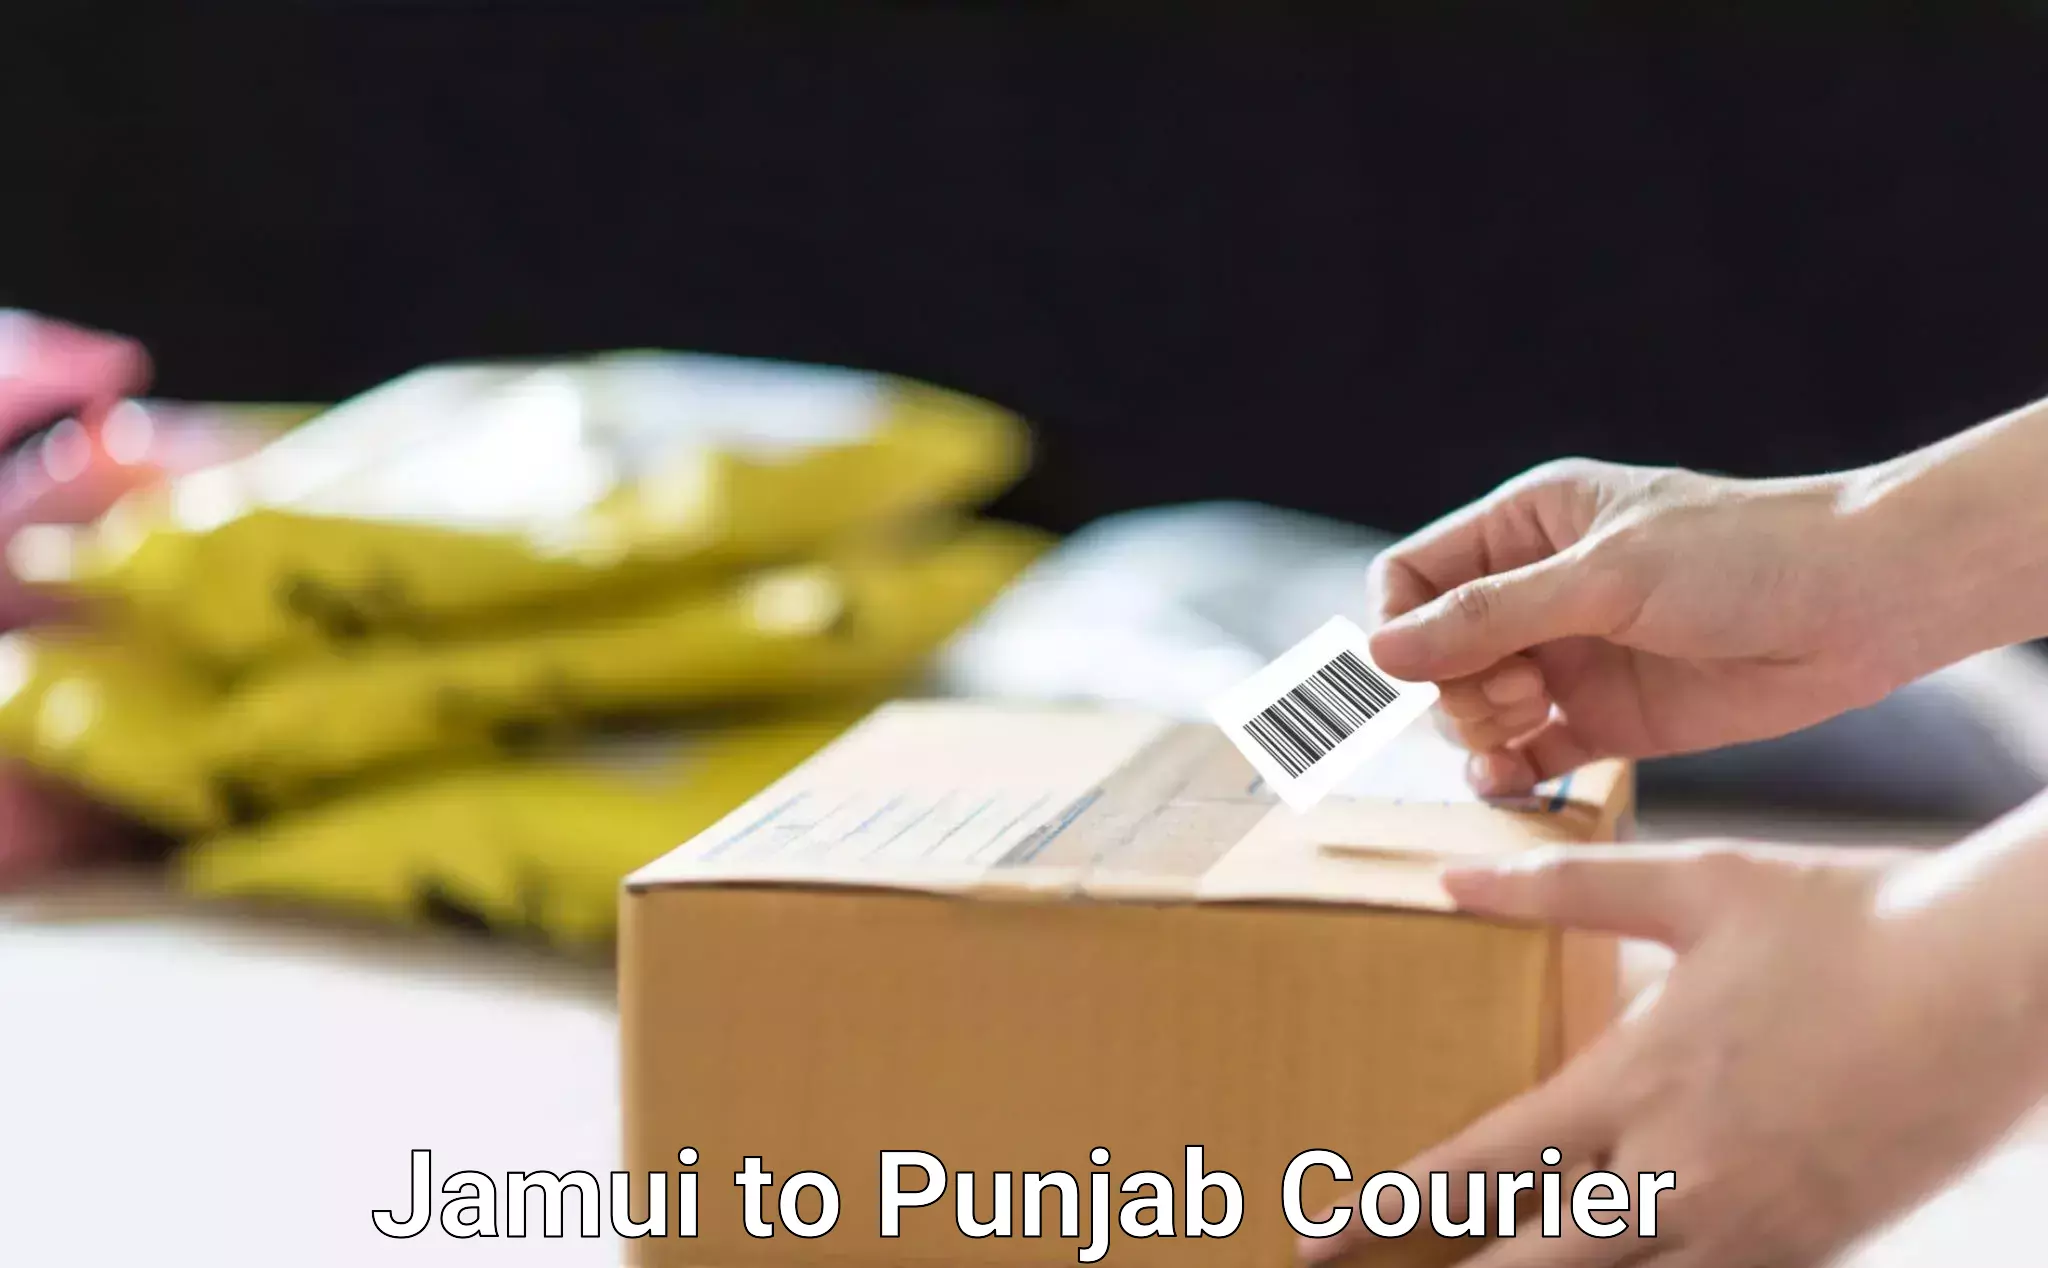 Cost-effective moving options Jamui to Moga